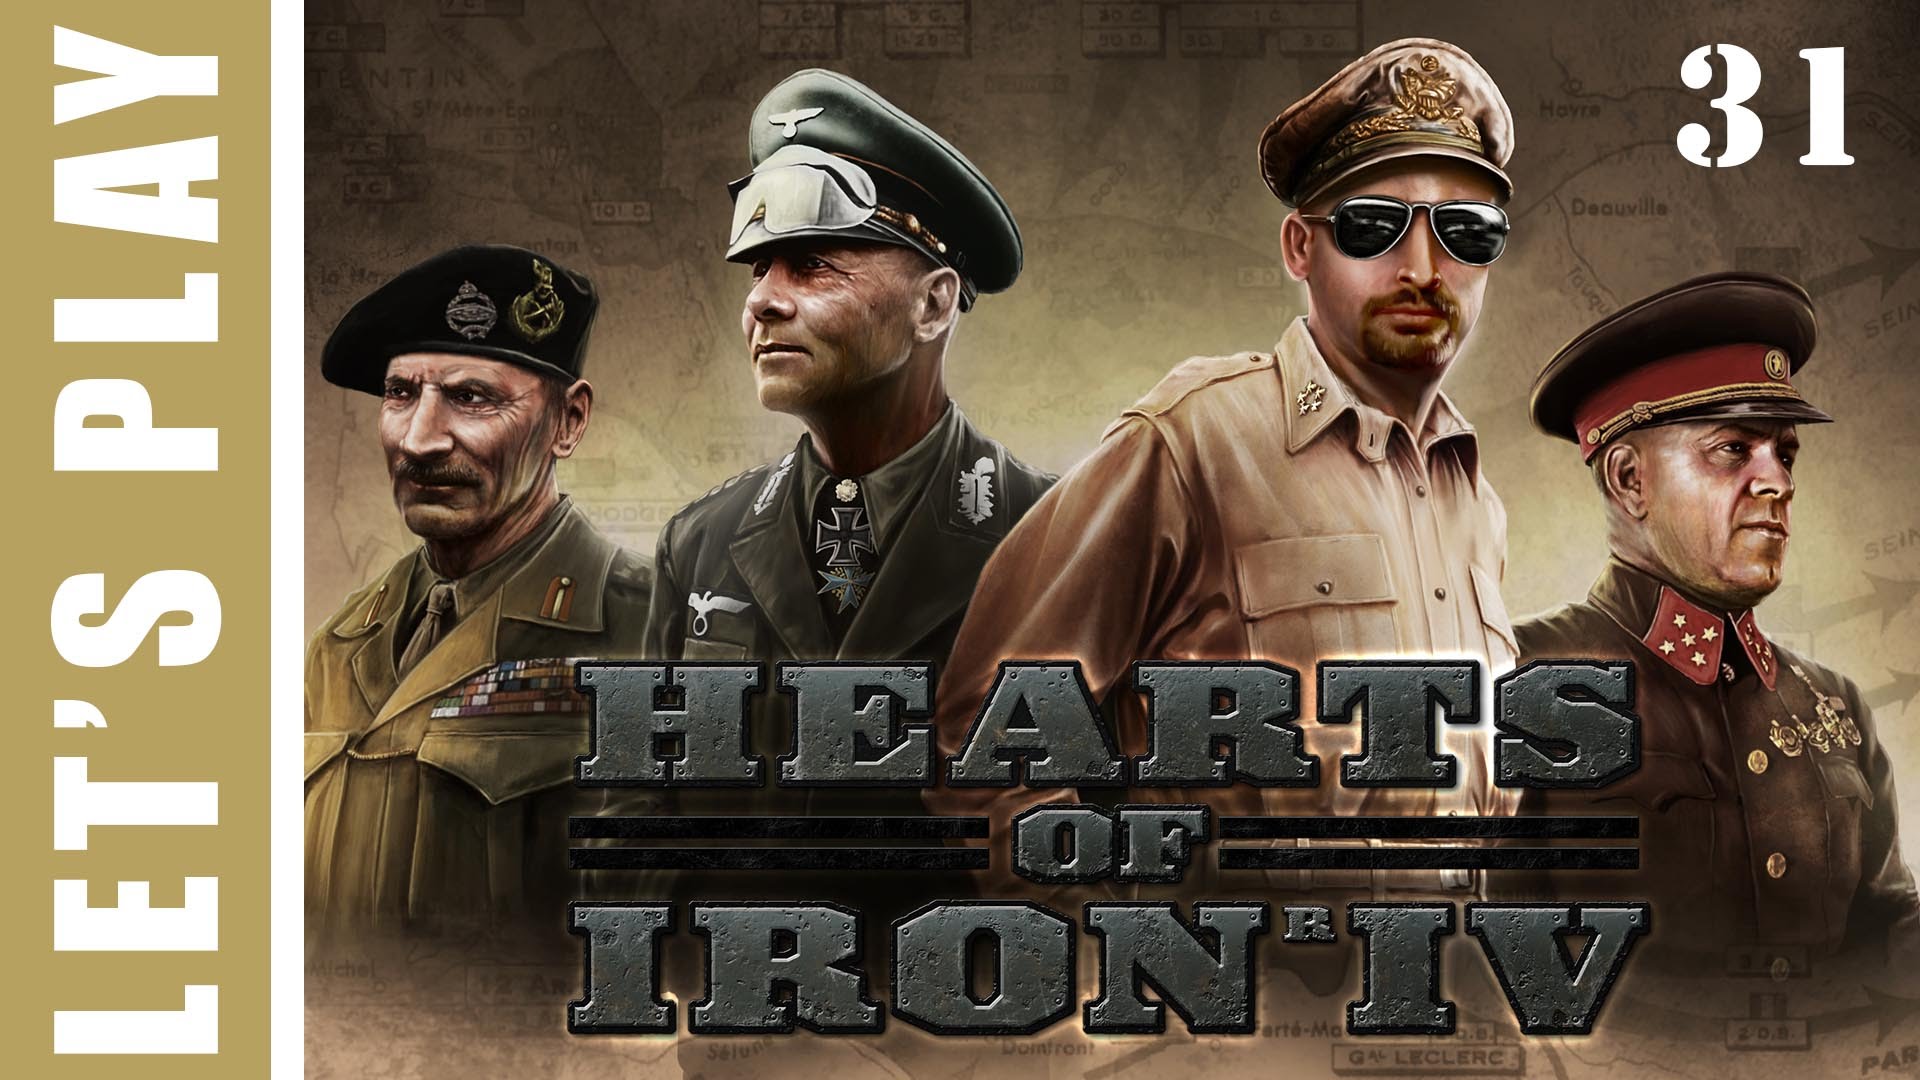 Hearts of Iron IV Germany Wins World War 2 Let’s Play 30